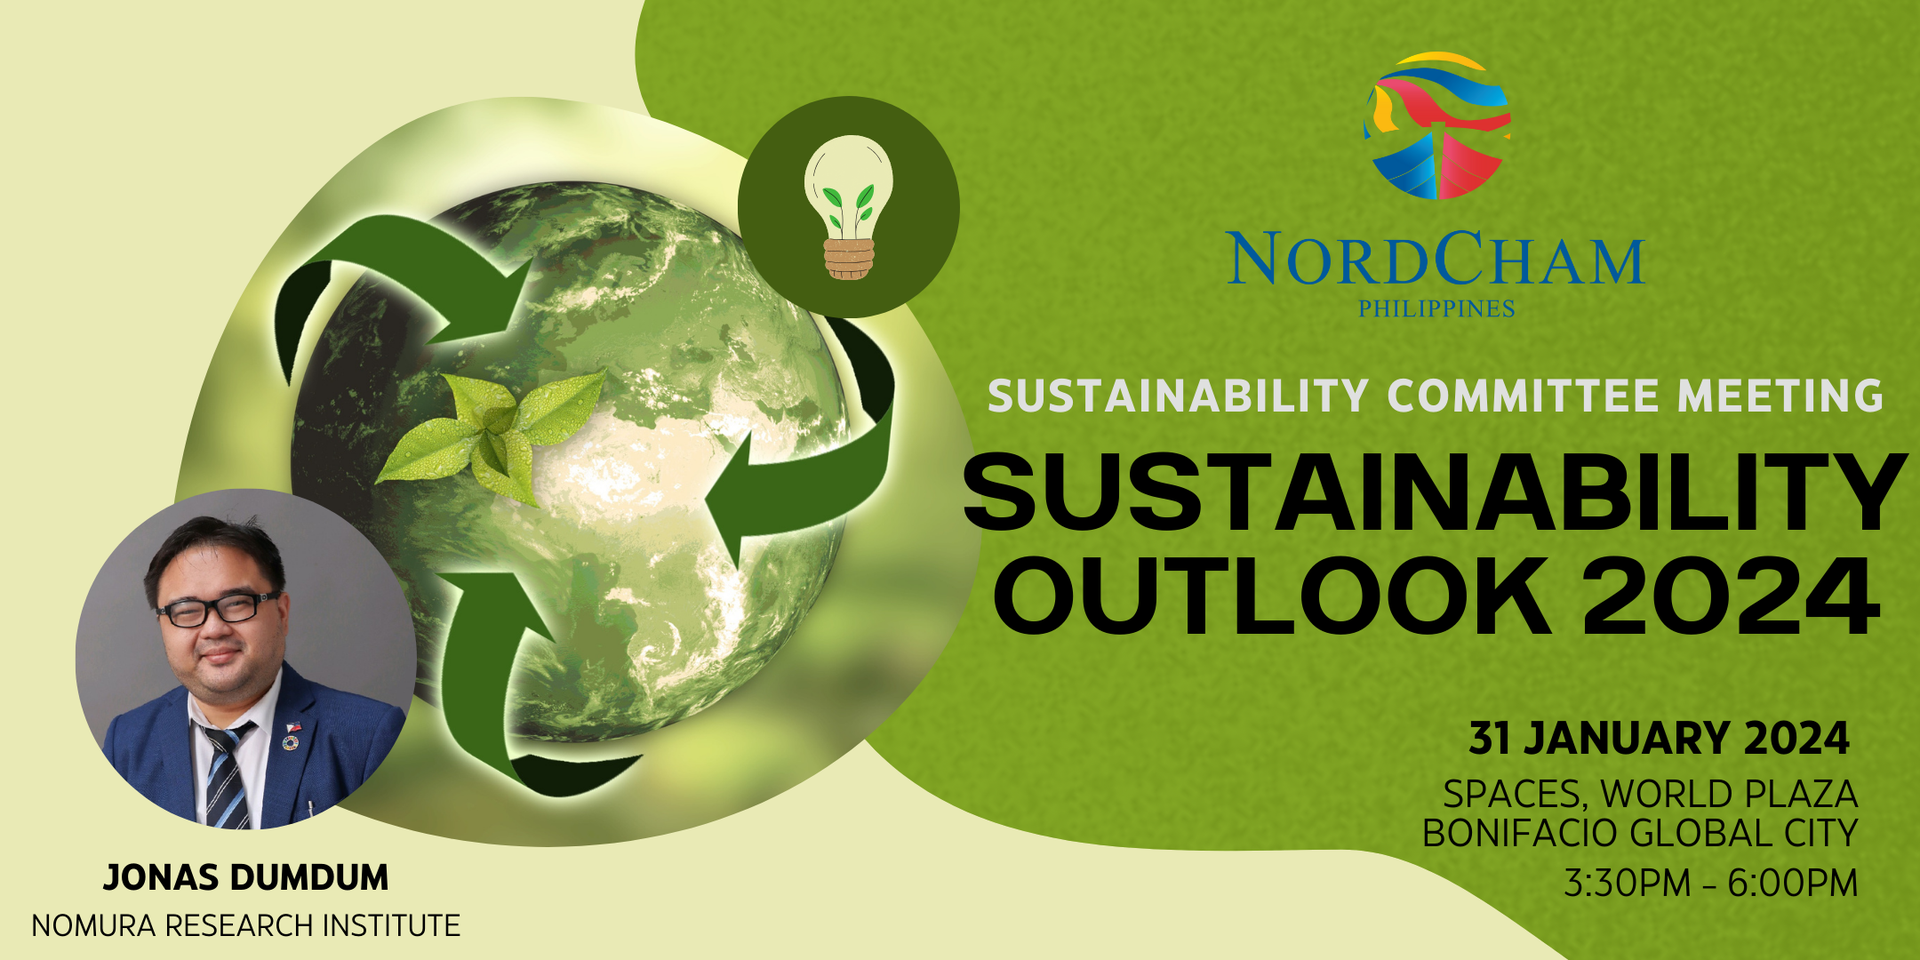 thumbnails SUSTAINABILITY COMMITTEE MEETING: SUSTAINABILITY OUTLOOK 2024 | 31 JANUARY 2024 | SPACES, WORLD PLAZA, BGC